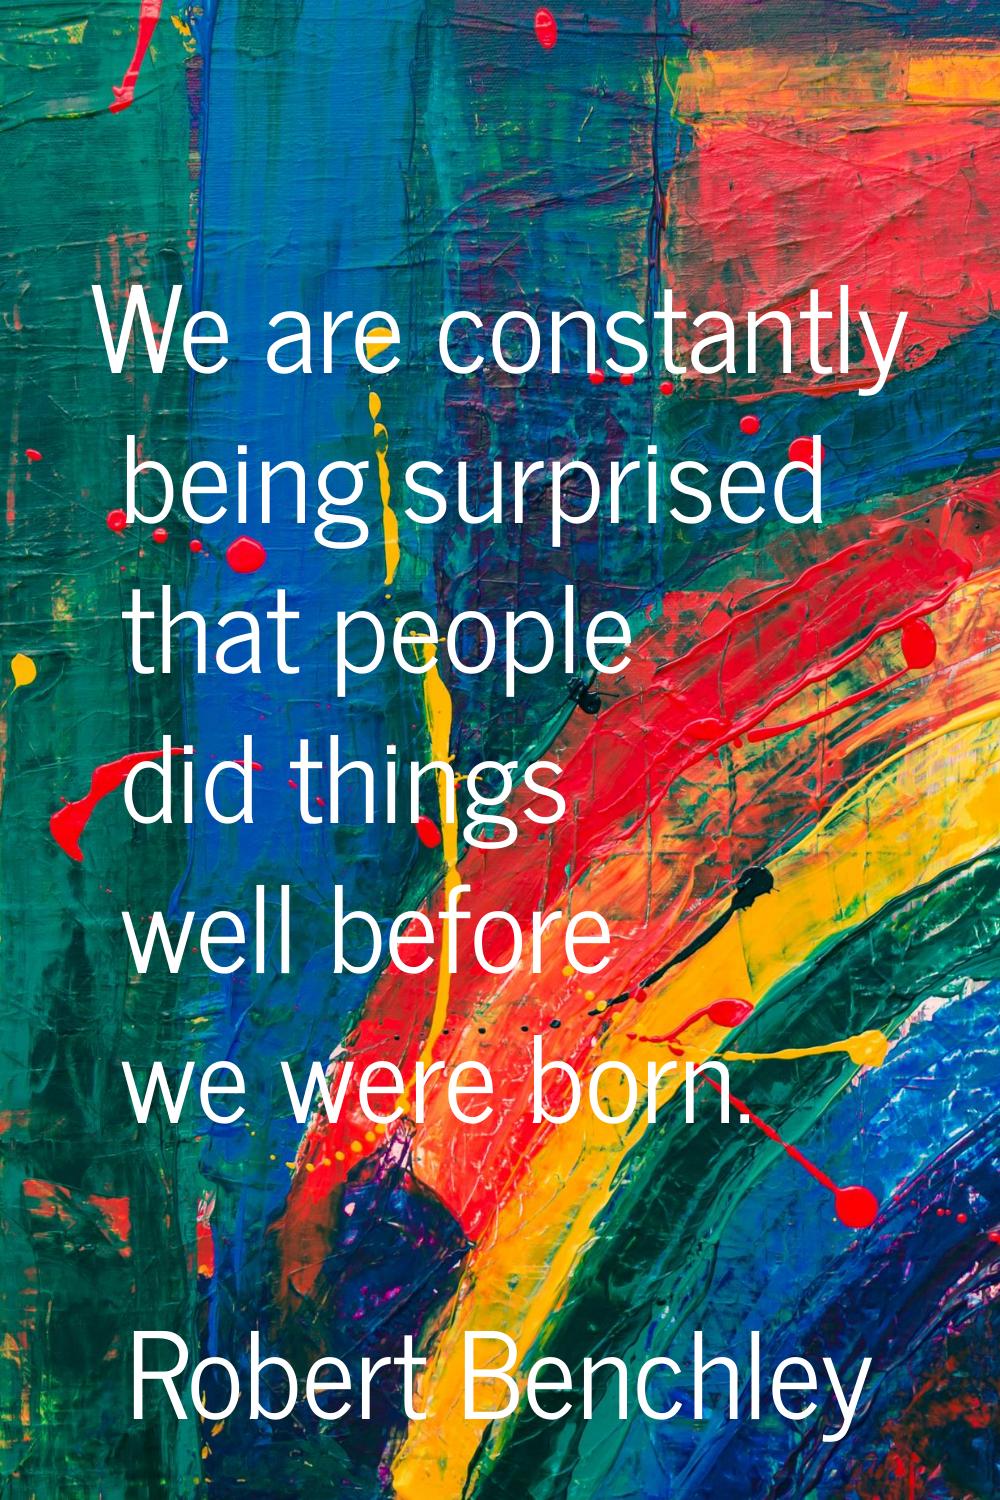 We are constantly being surprised that people did things well before we were born.